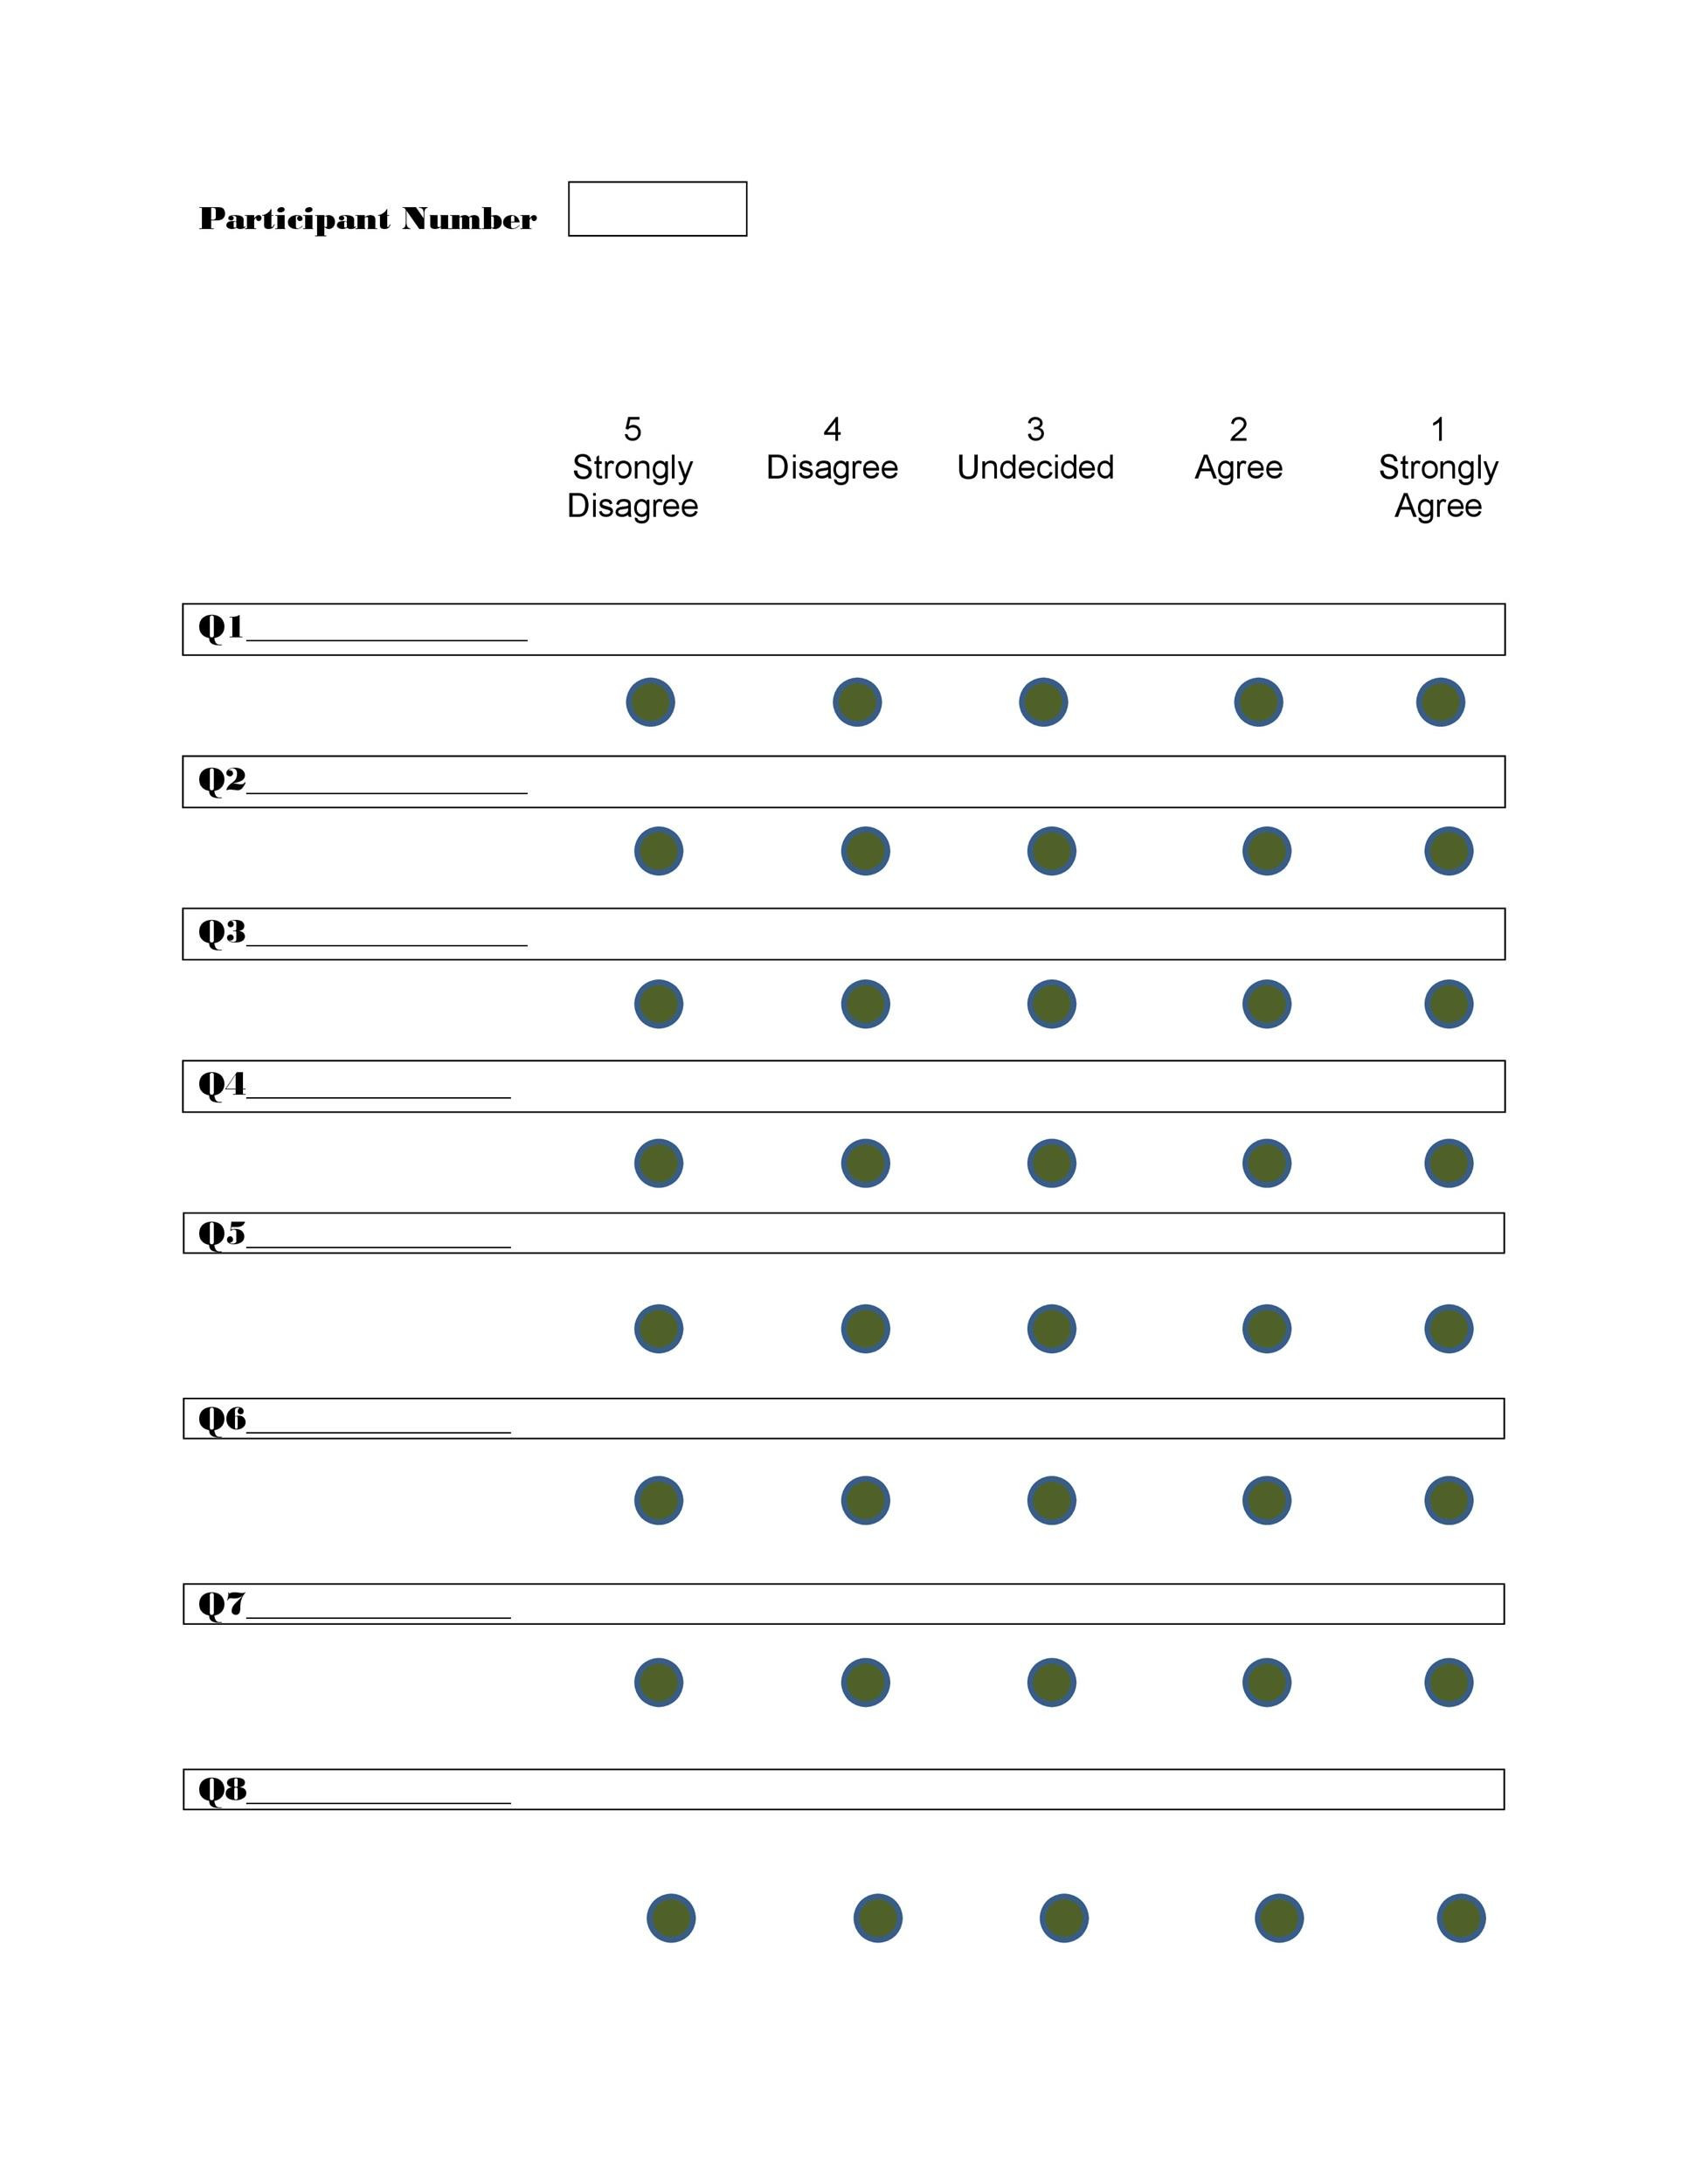 Skala Likert 4 Mata - A likert scale is a psychometric scale commonly